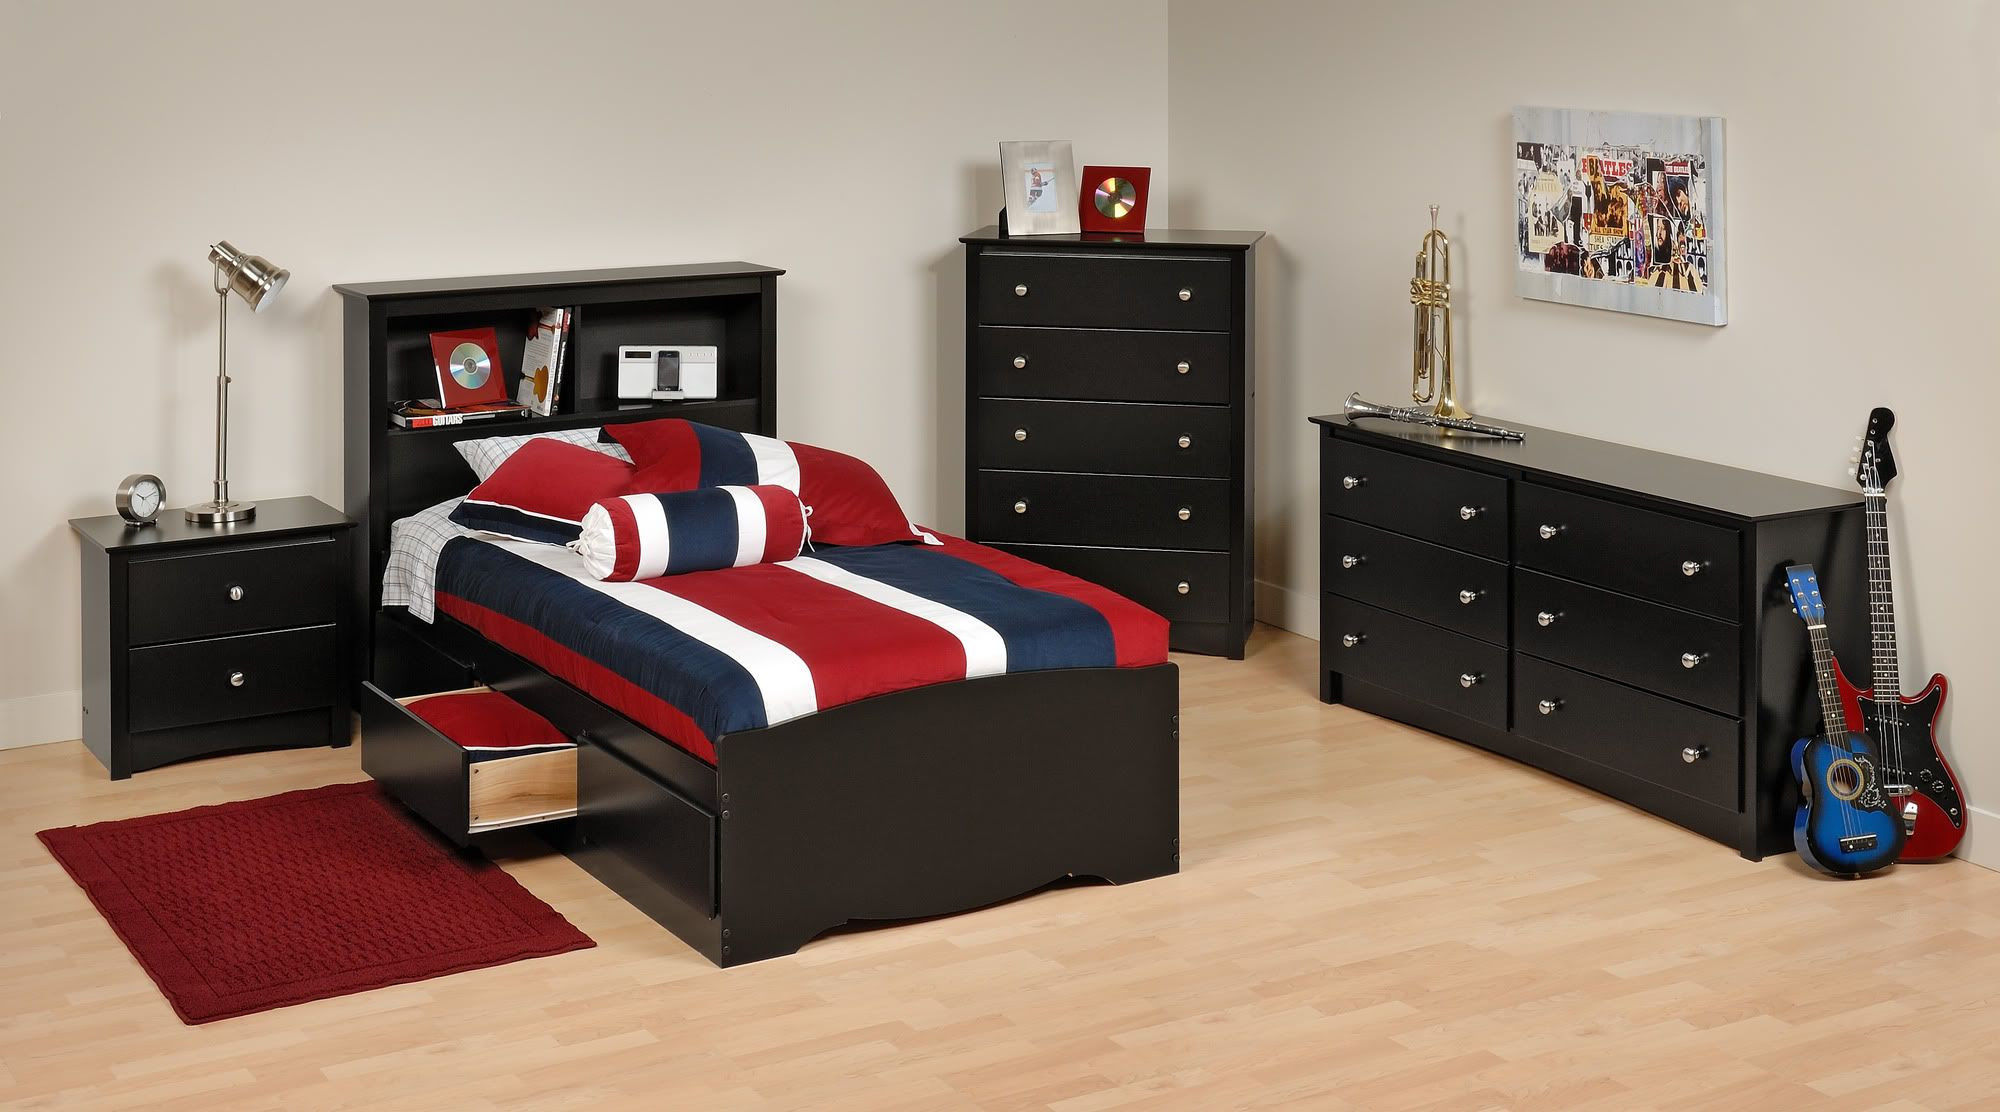 Boy Twin Bedroom Set
 Alluring Boys Bedroom Set with Twin Size Bookcase Bed and